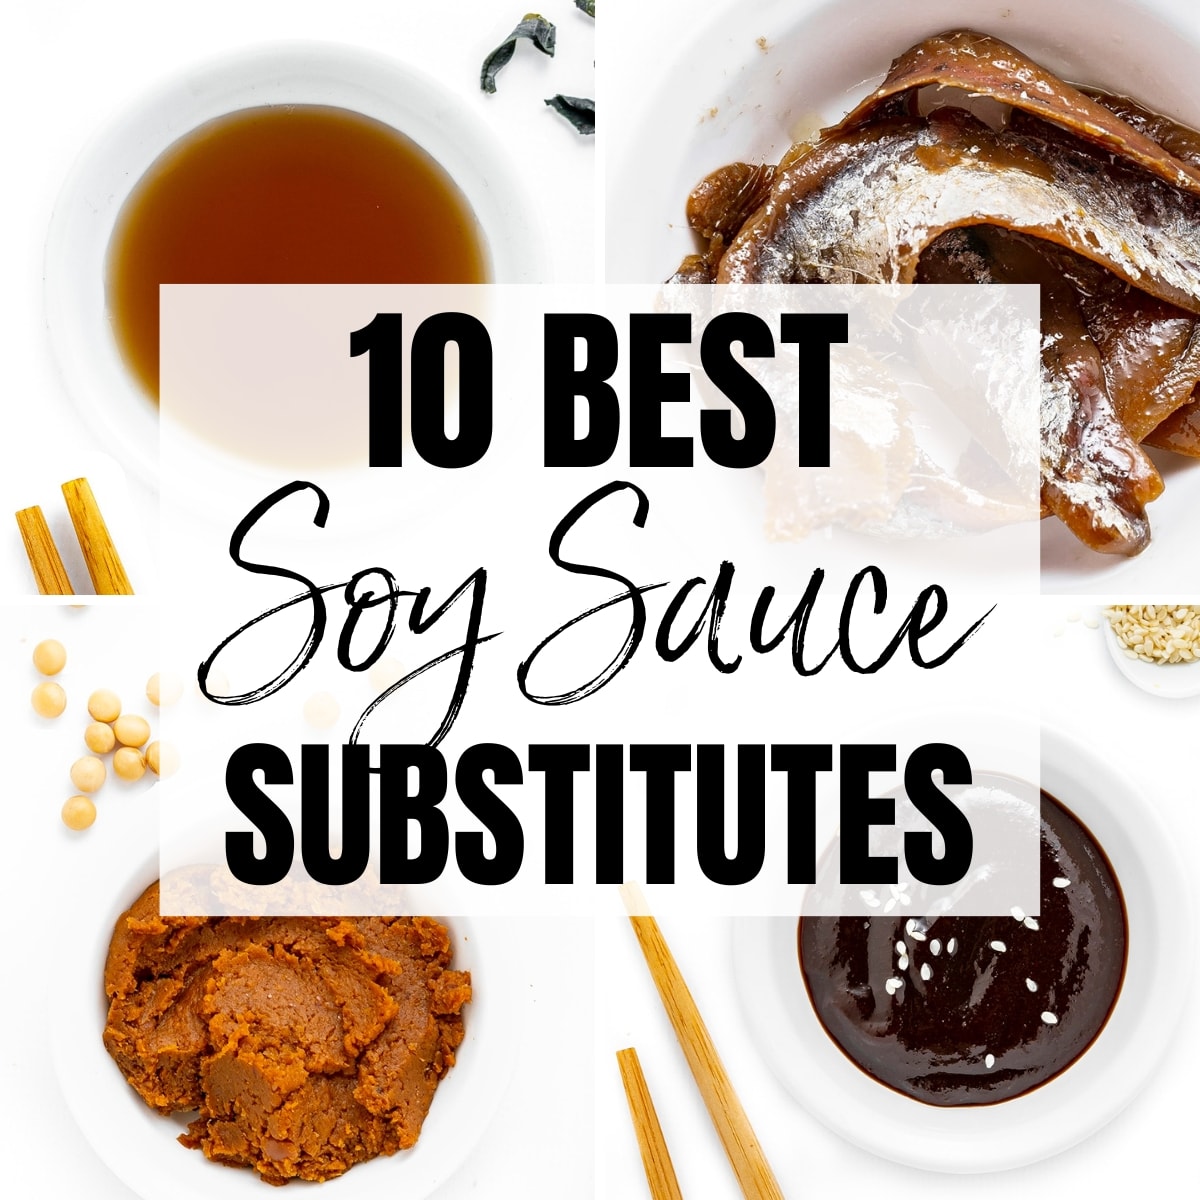 Soy sauce substitute ideas in bowls.